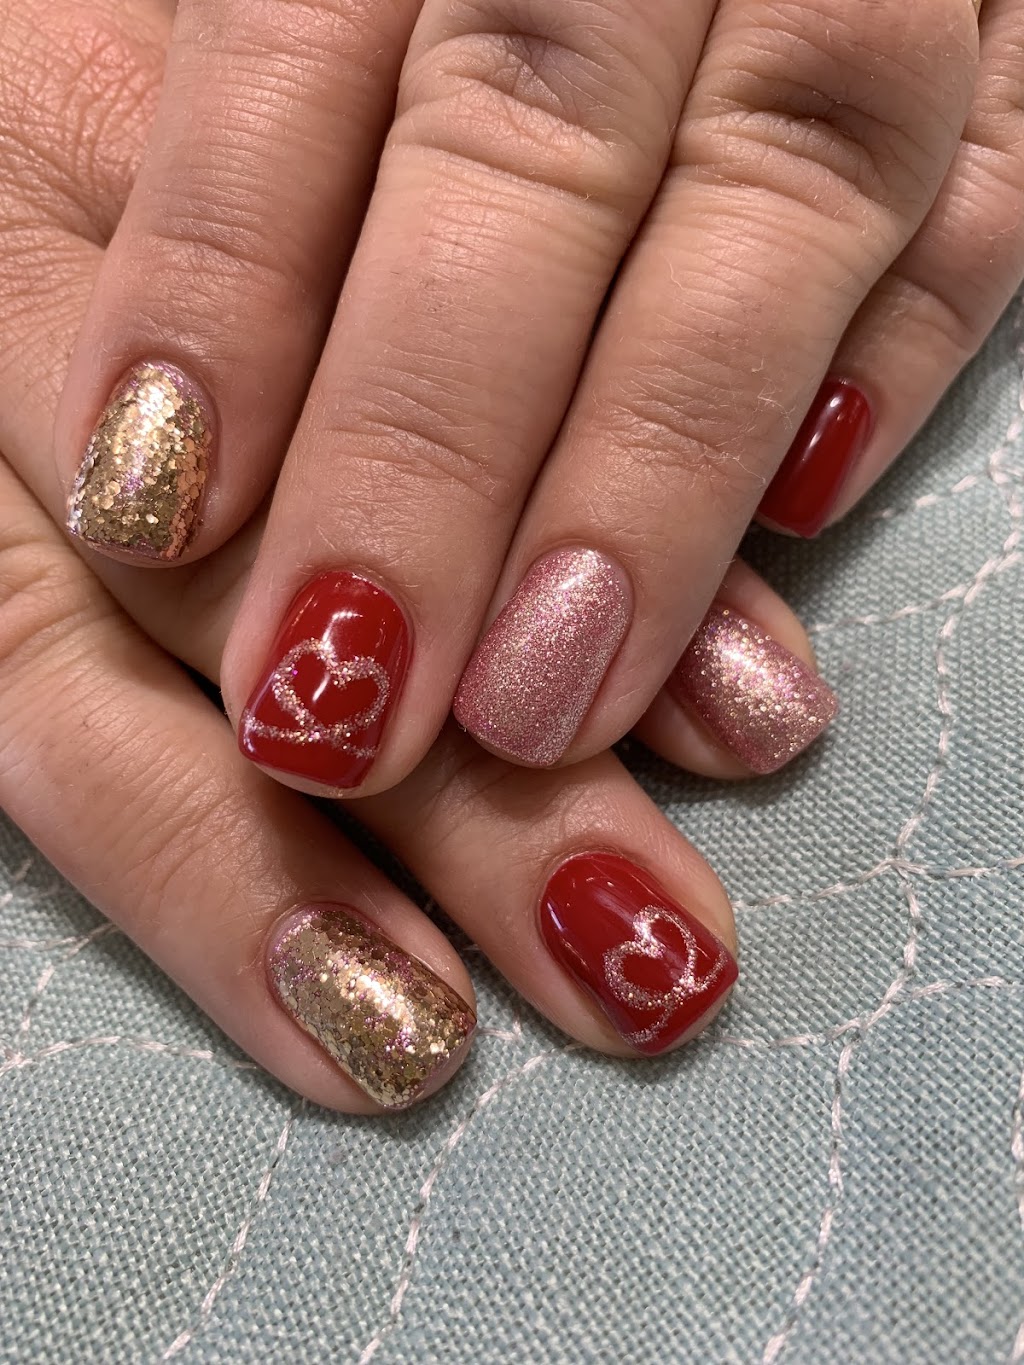 Nails For You | 475 High Mountain Rd, North Haledon, NJ 07508 | Phone: (973) 423-1112